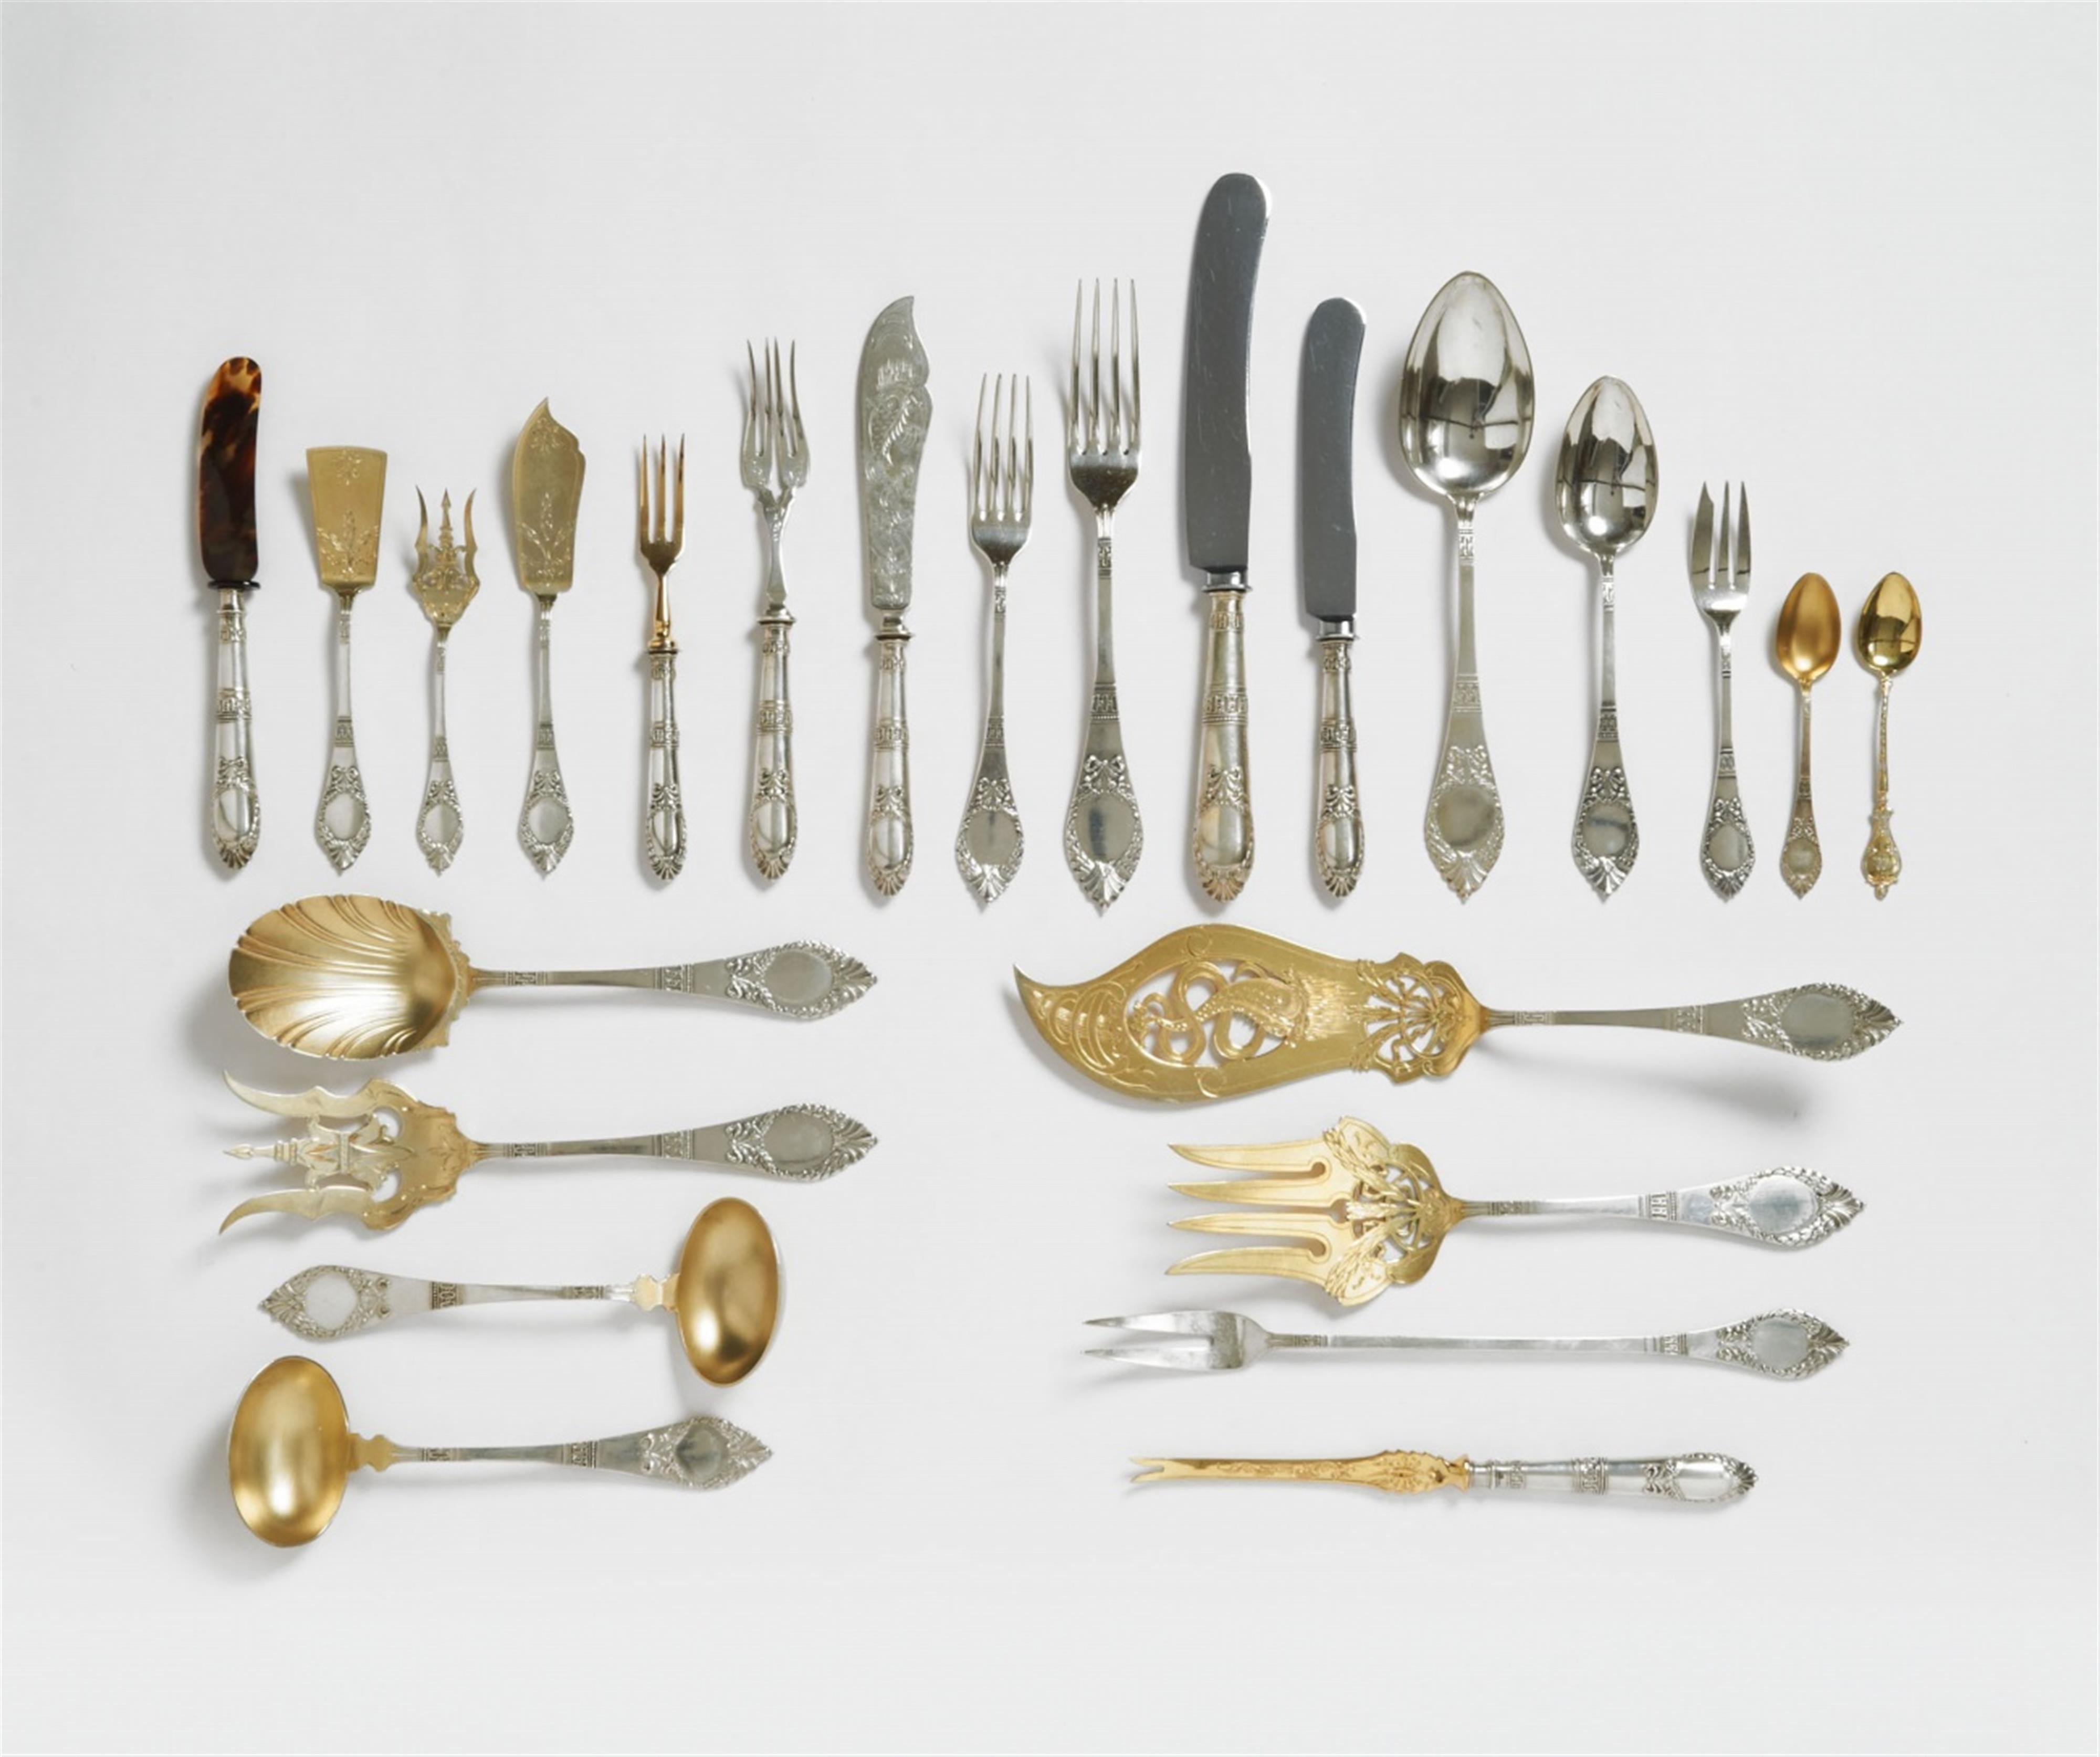 An extensive German silver partially gilt 429 piece cutlery set. Comprising 36 dinner knives/forks, 24 soup spoons, 24 starter knives/forks/spoons, 24 fish knives/forks, 24 coffee spoons and 12 cake forks, 24 fruit knives/forks, horn-handled butter knives - image-1